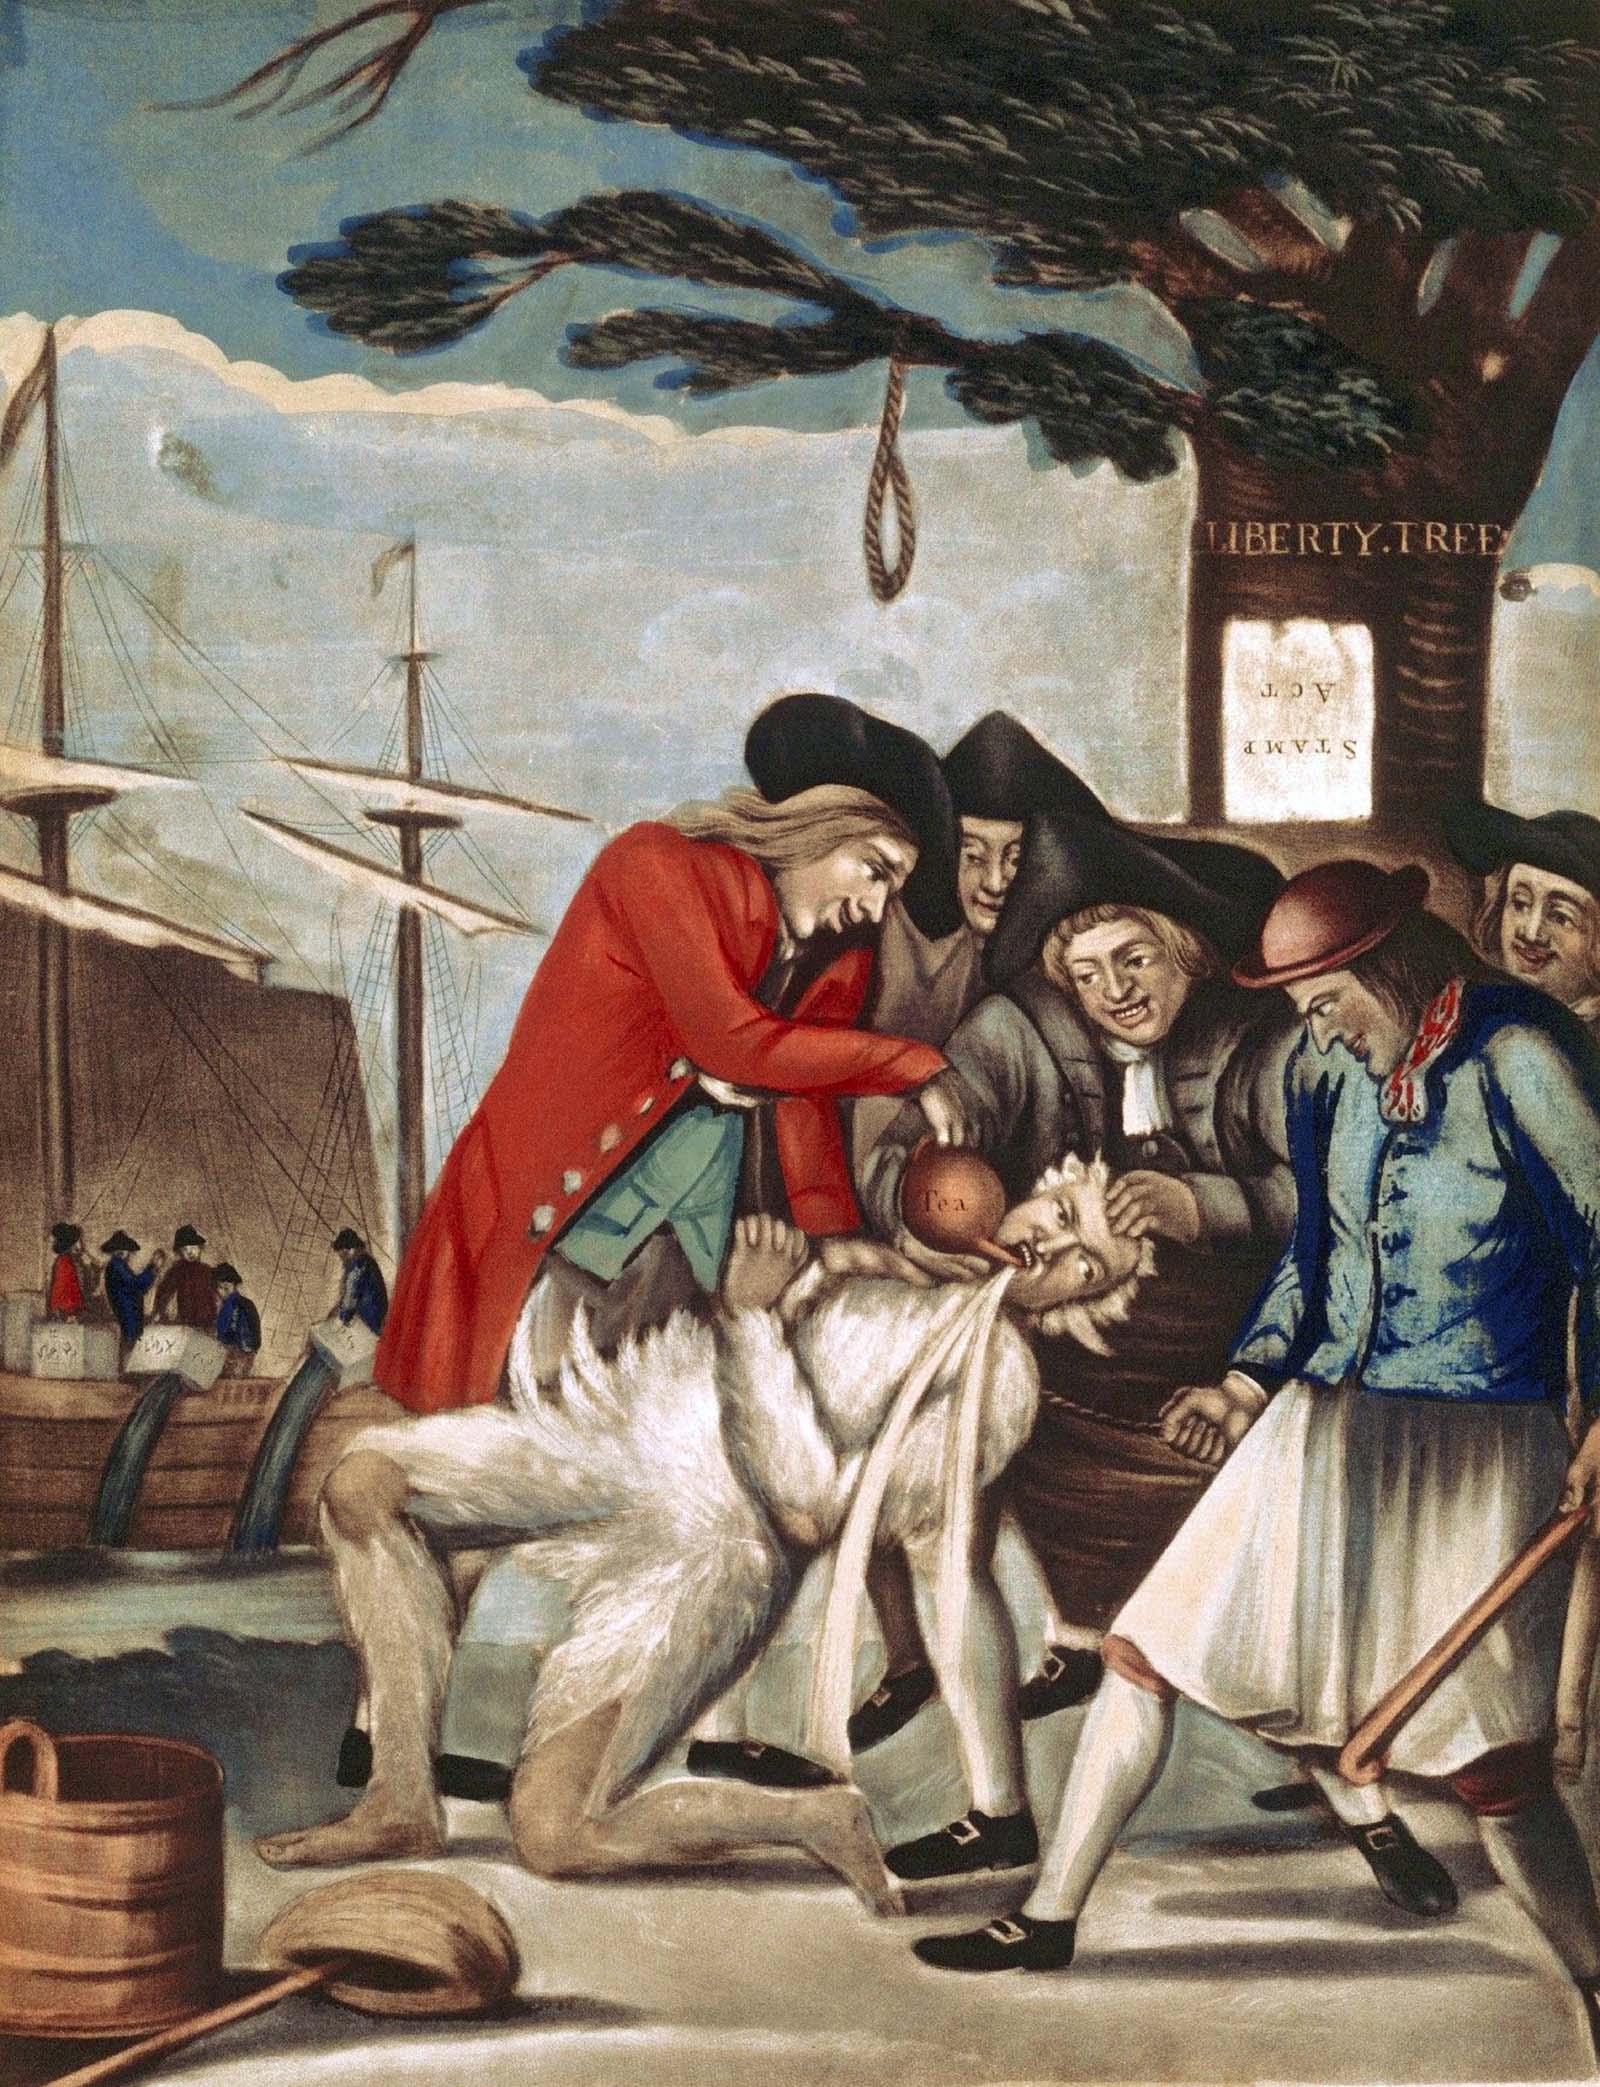 https://www.americanyawp.com/text/wp-content/uploads/Philip_Dawe_attributed_The_Bostonians_Paying_the_Excise-man_or_Tarring_and_Feathering_1774.jpg